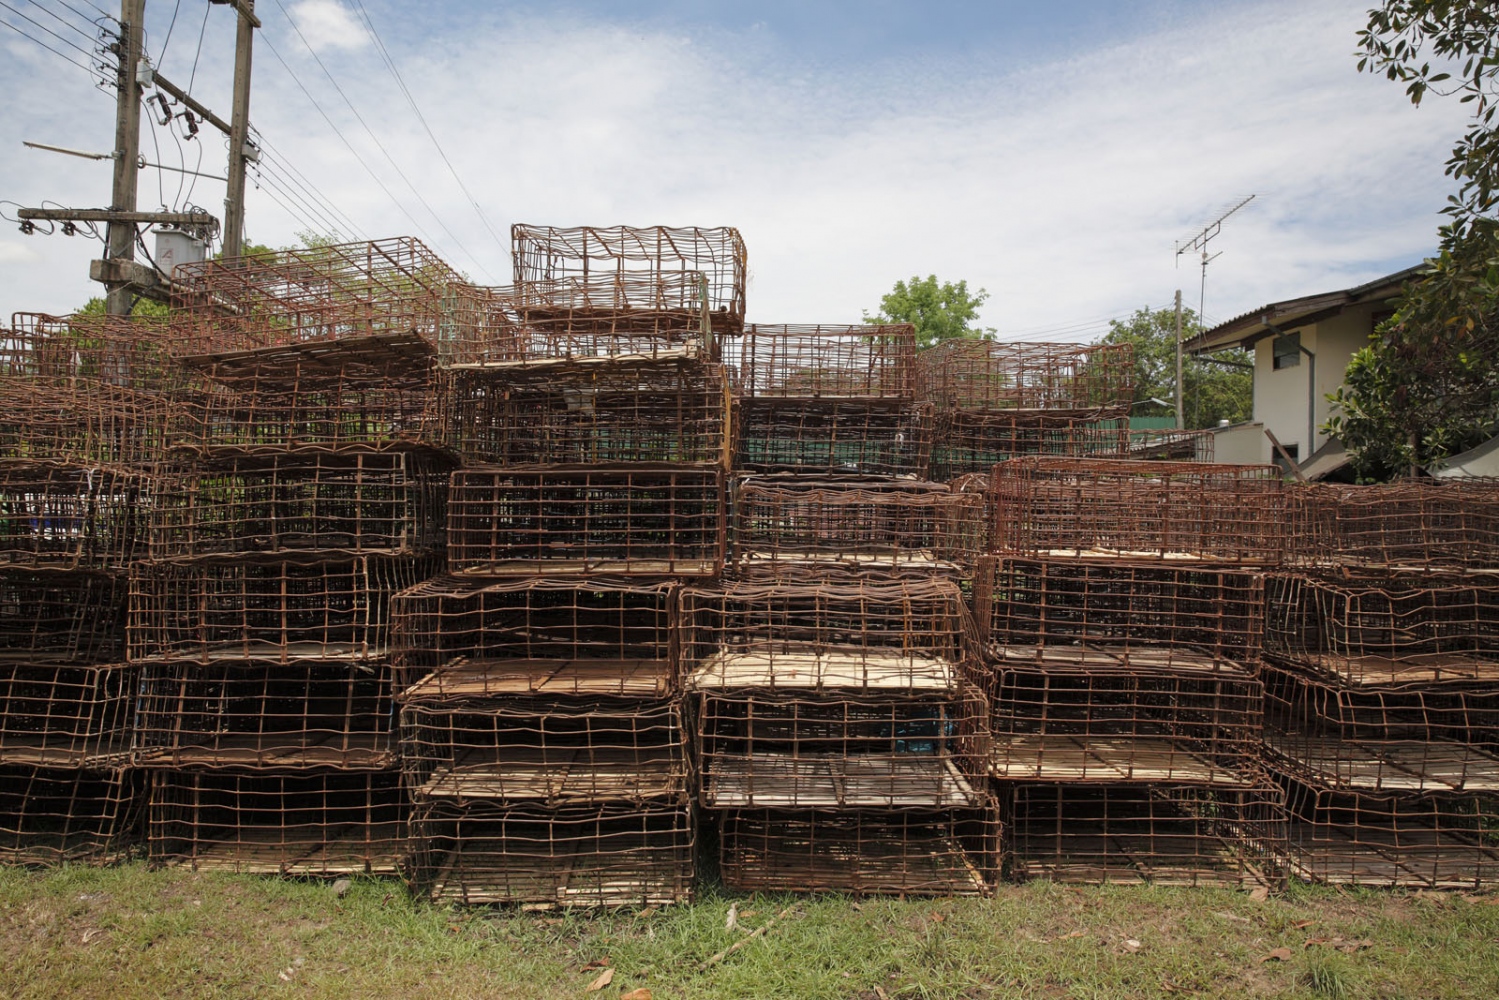 THAILAND'S ILLEGAL DOG MEAT TRADE - At Nakhon Phanom dog shelter, currently home to almost...